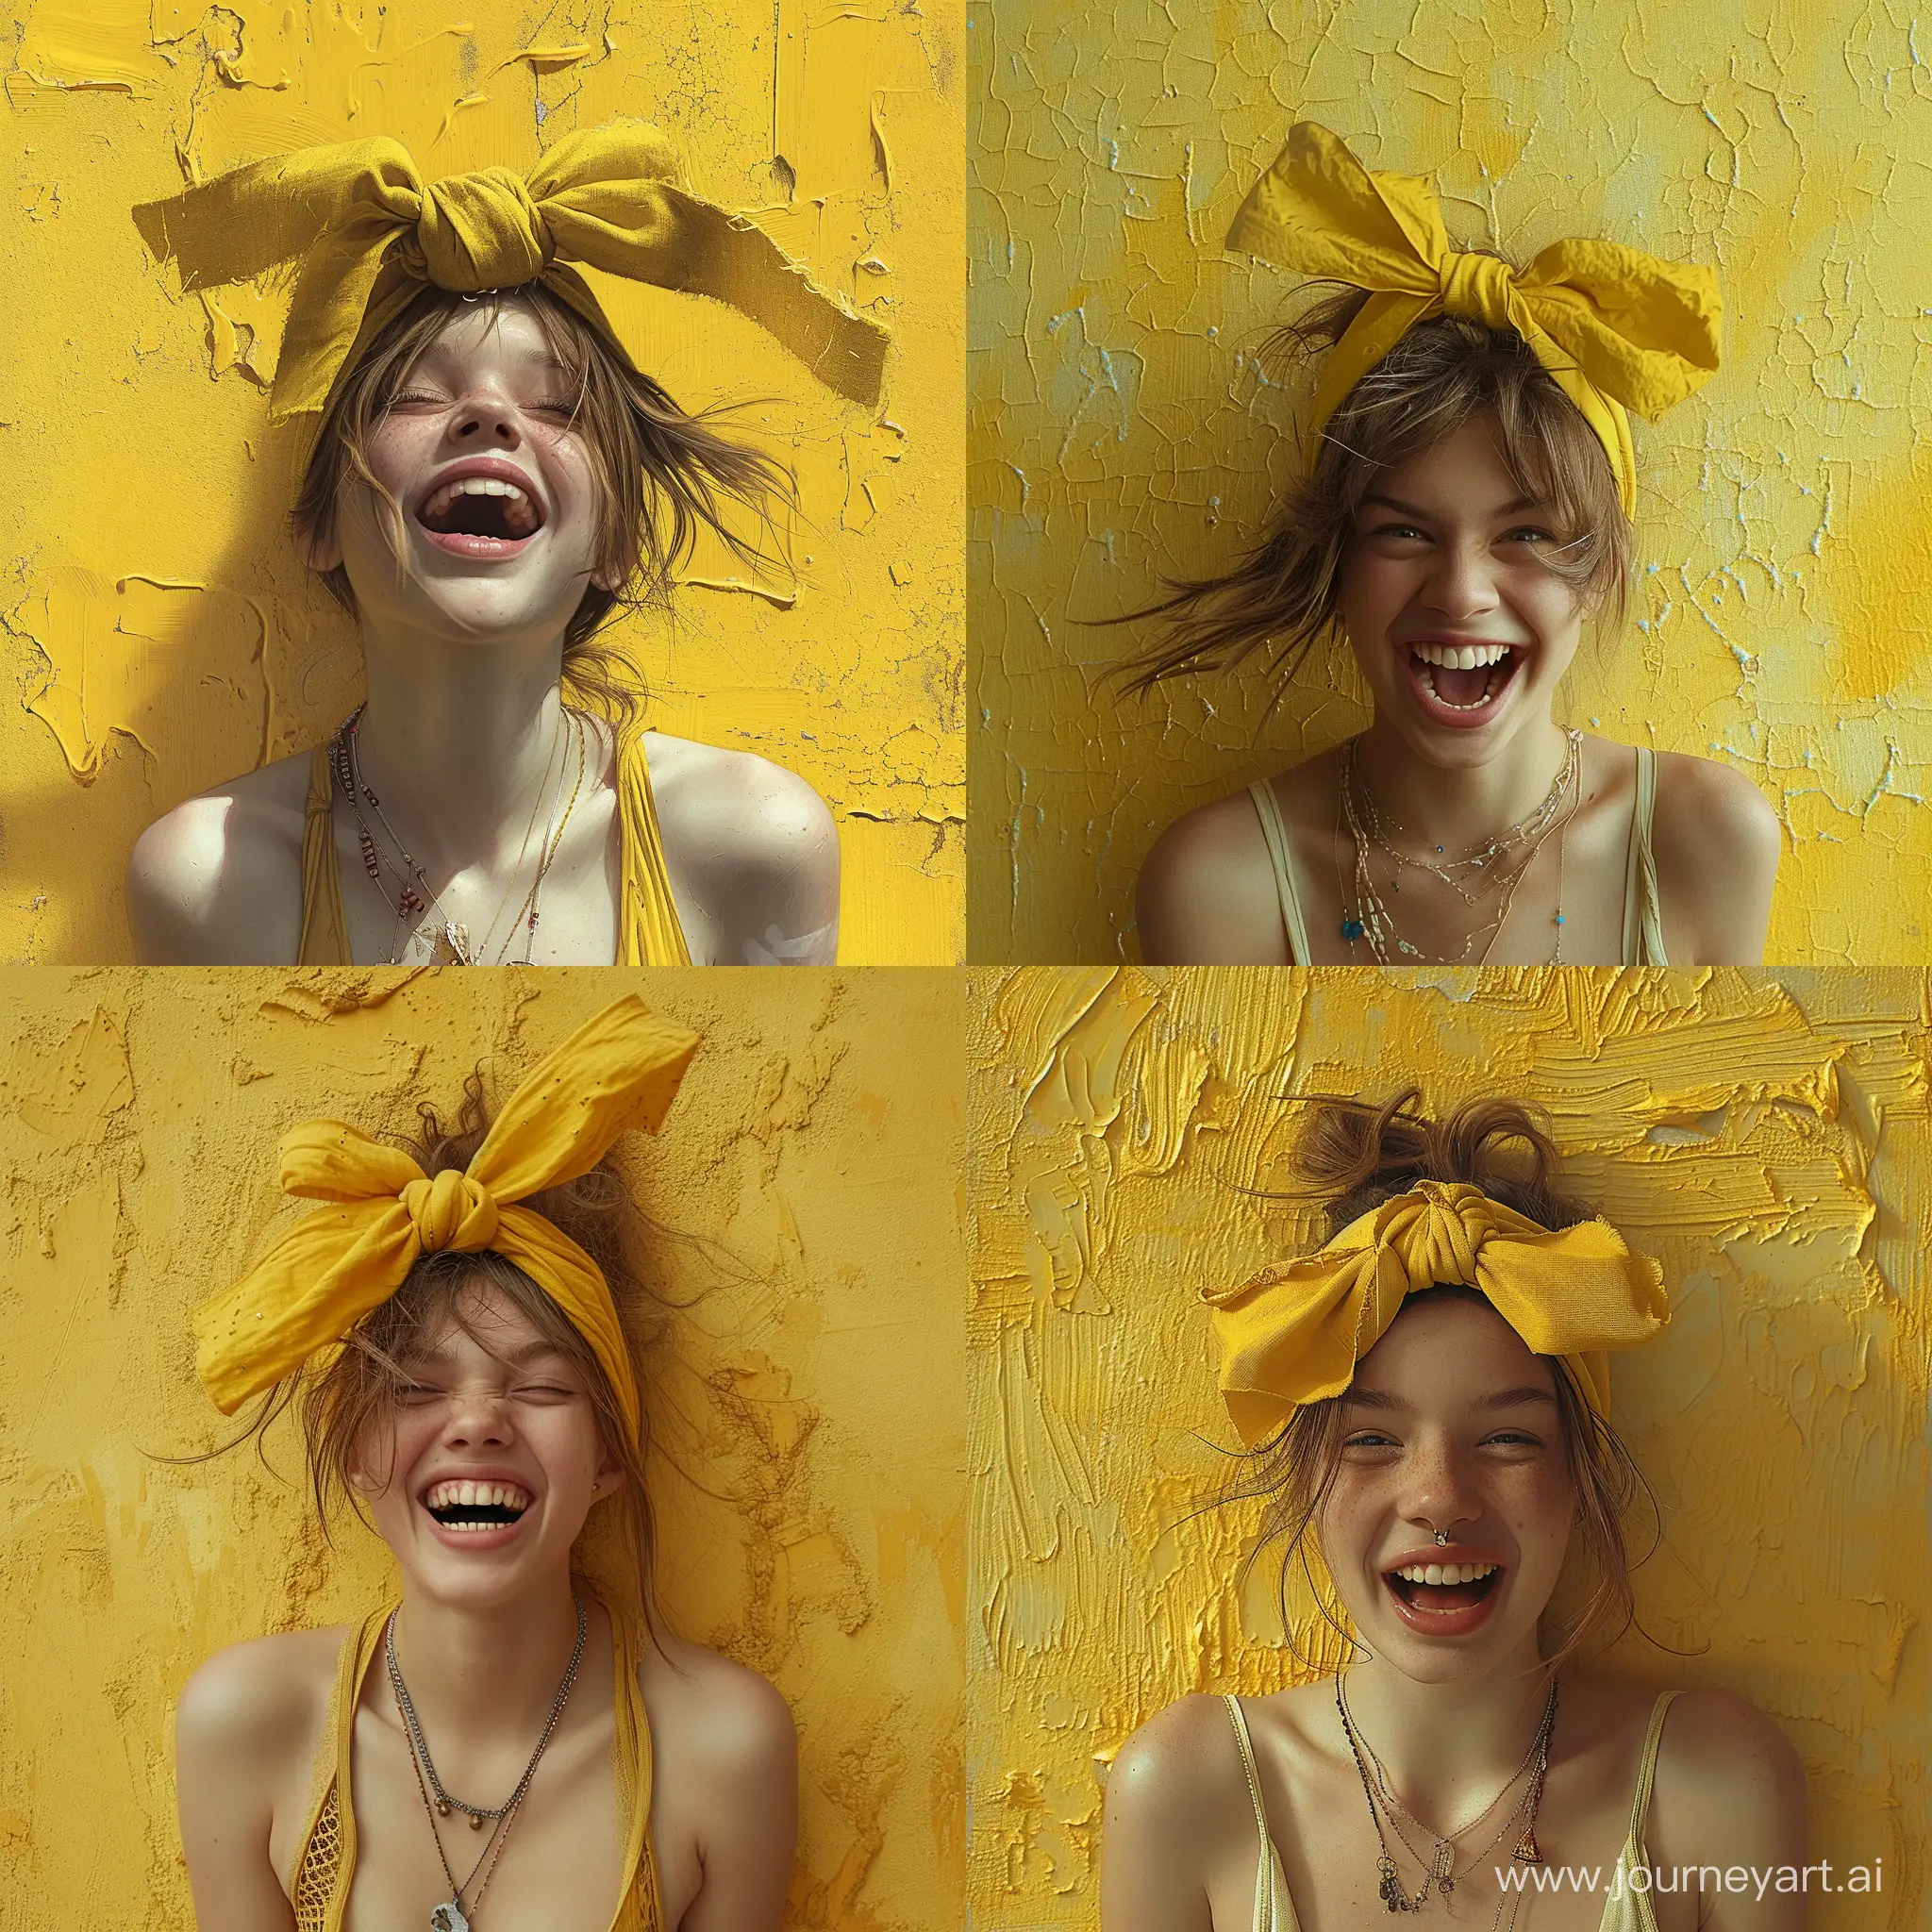 A girl with crazy laugh wearing a yellow headband tied in a bow on the top of their head. They have light brown hair that is pulled back and messy, with strands sticking out around the headband. The background is a textured, yellow surface that matches the color of the headband. The person's shoulders and upper chest are visible; they appear to be wearing a tank top or similar garment with thin straps. There are some necklaces around the person’s neck, adding detail to the otherwise simple presentation.
